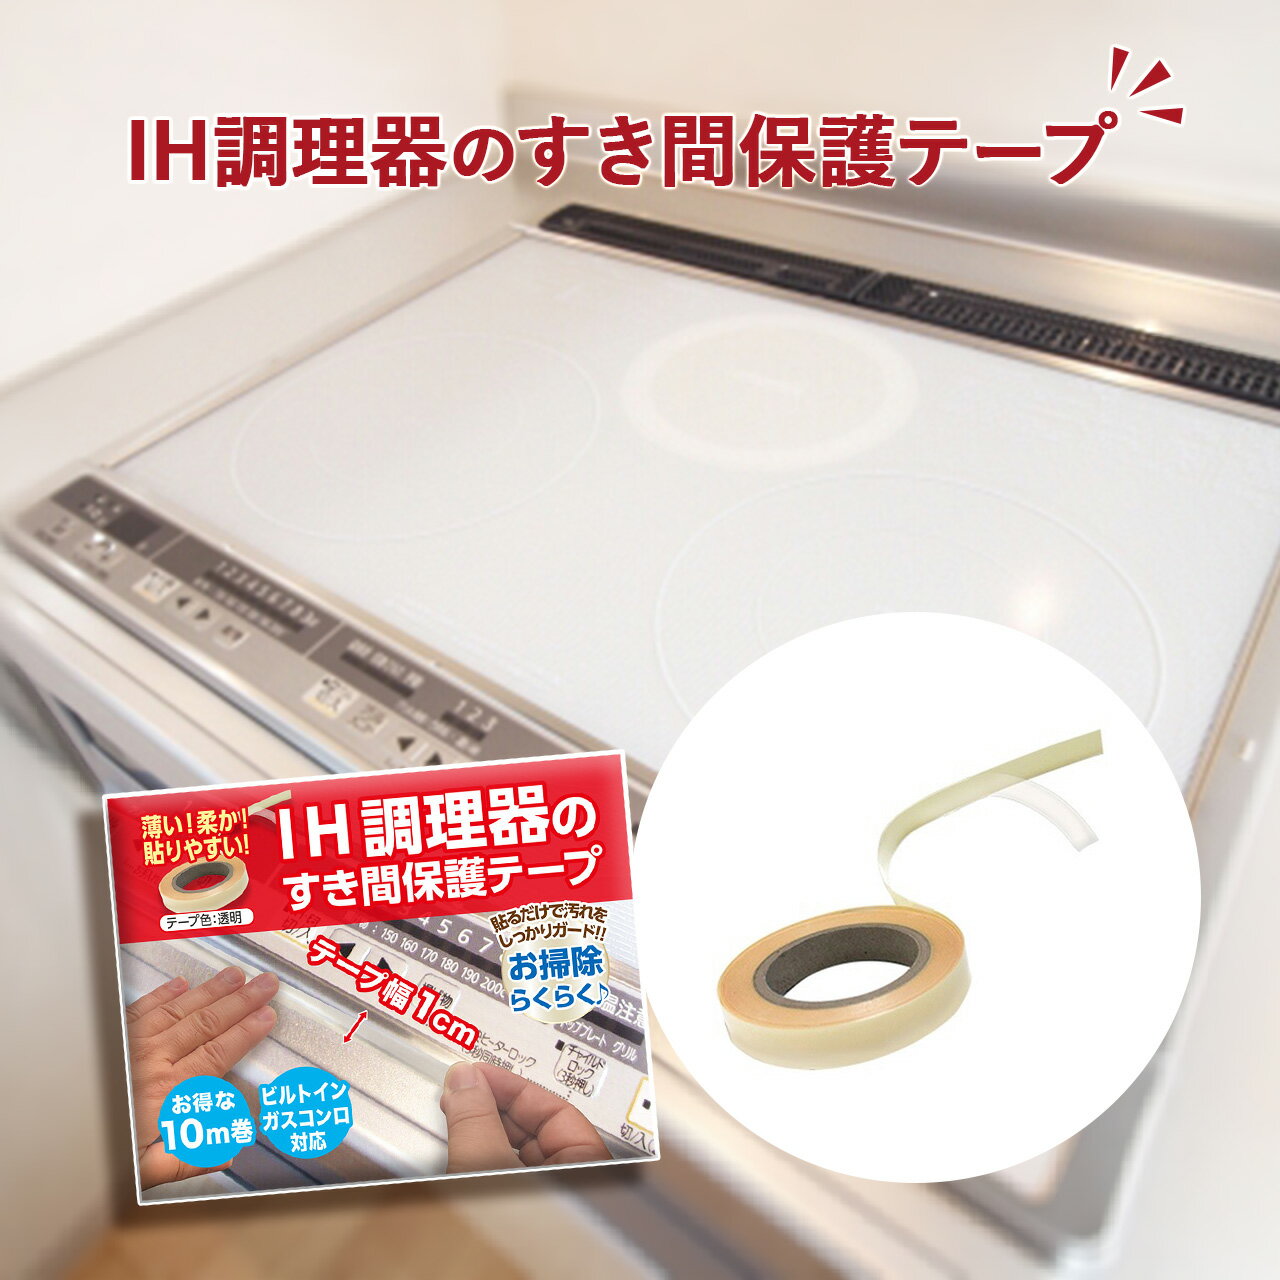 IH調理器 すきま保護テープ 10m 幅1cm 透明 <strong>コンロ</strong> IH 隙間 テープ カバー 油はね ガード 保護 <strong>コンロ</strong>周り 掃除 スキマ <strong>フレームカバー</strong> ガス<strong>コンロ</strong> 隙間シール IHプレート 汚れ防止 ガラストップ<strong>コンロ</strong> 縁 フチ 油汚れ